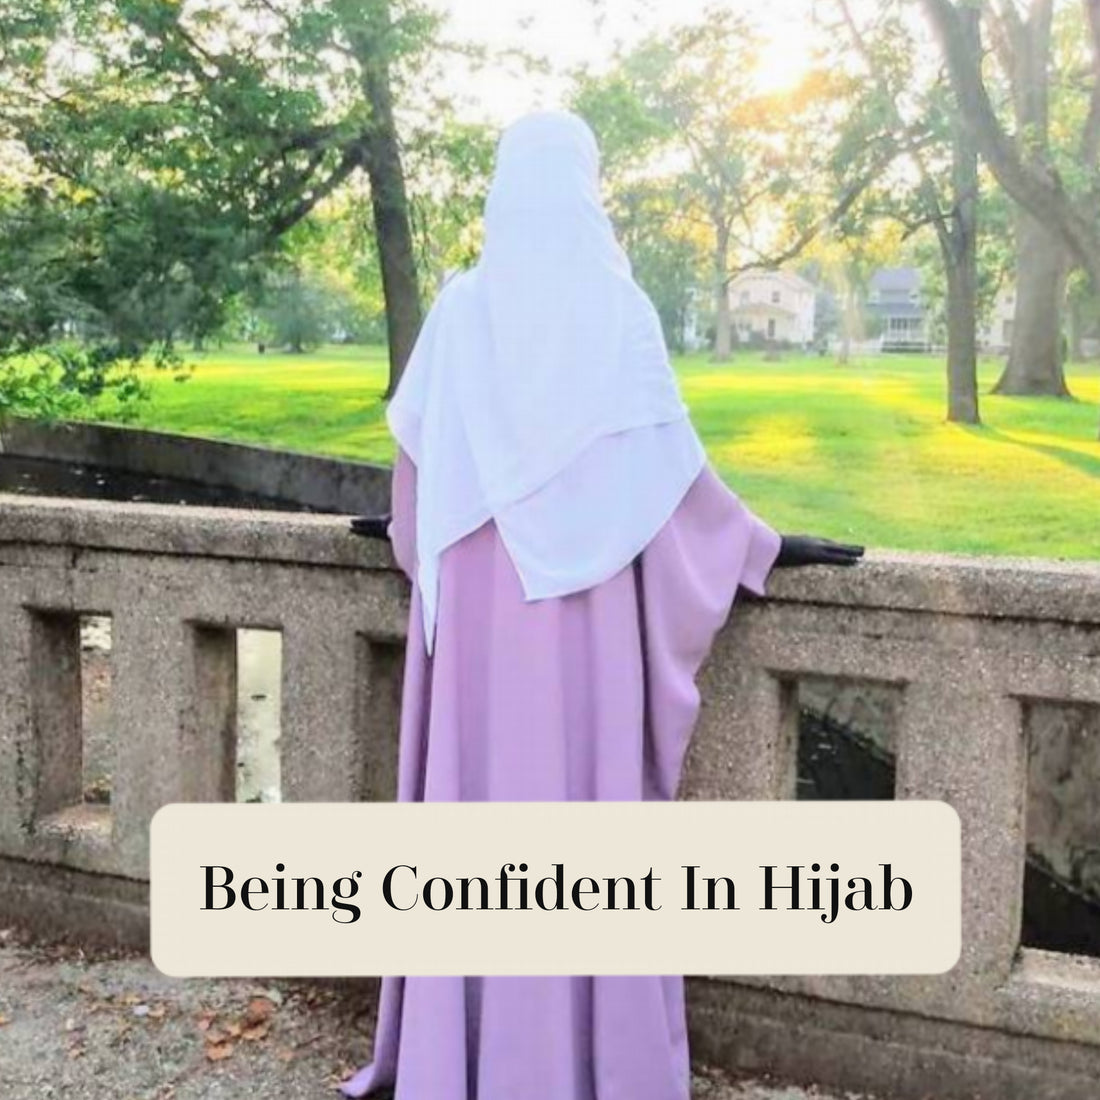 Being Confident In Hijab